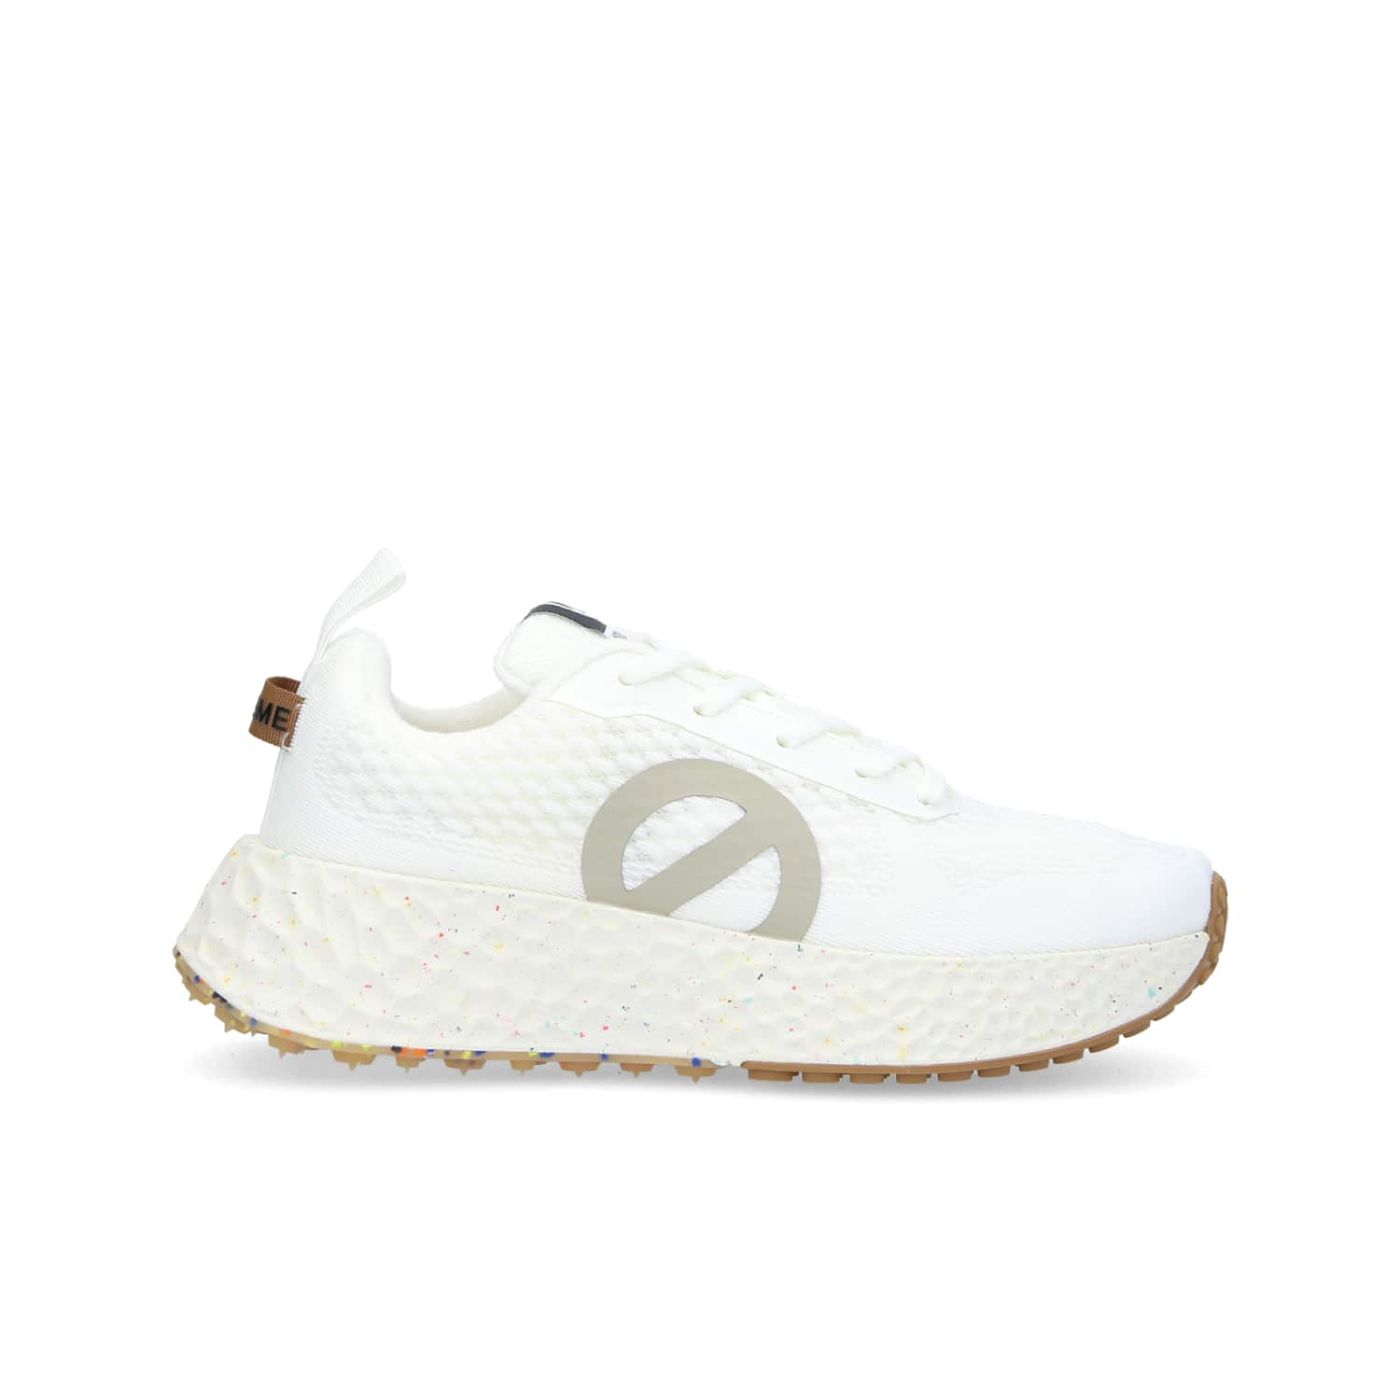 CARTER FLY M - MESH RECYCLED - WHITE/GREGE